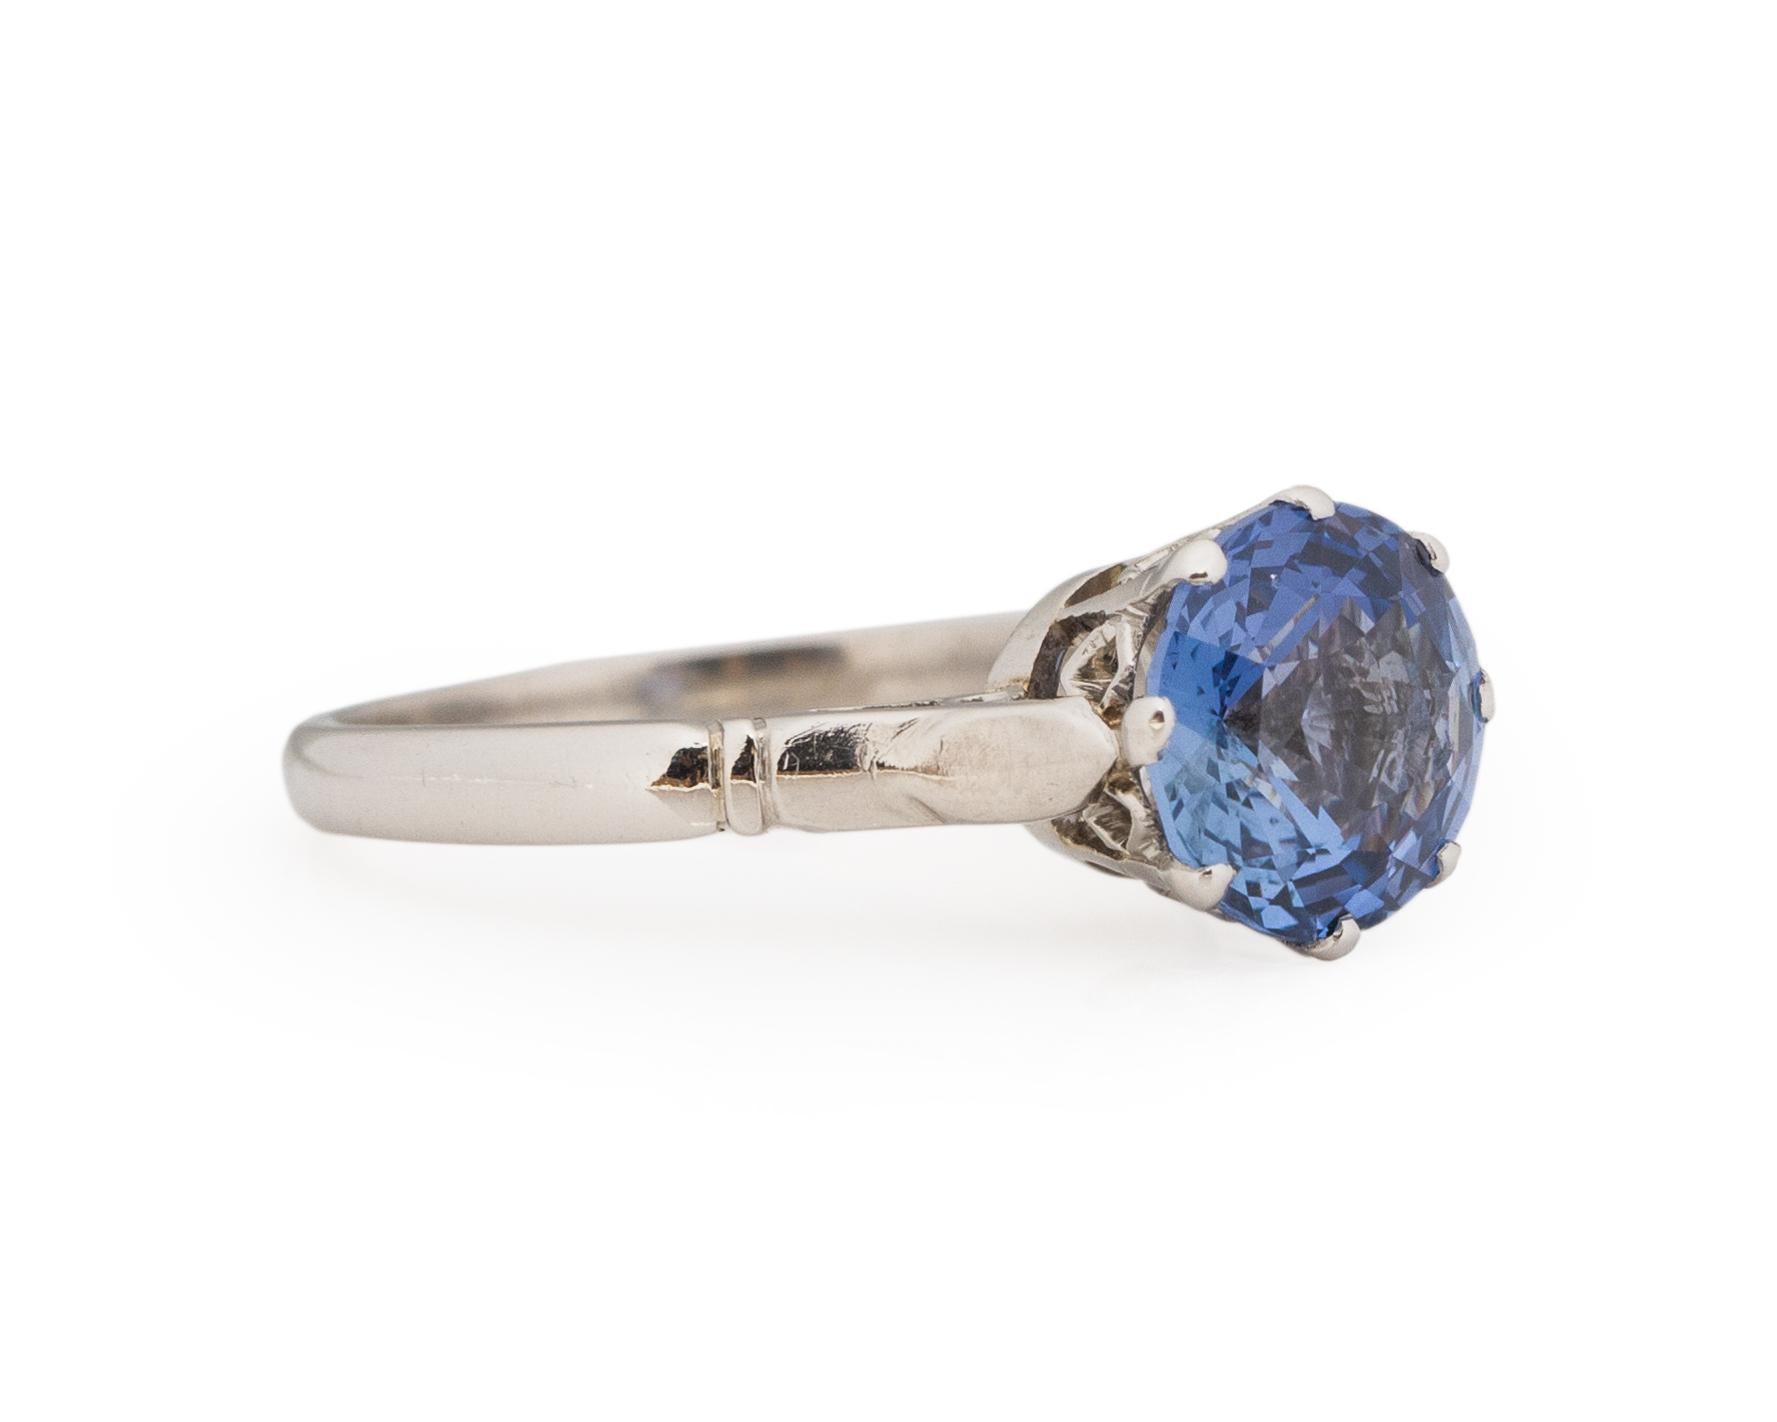 Ring Size: 6.5
Metal Type: Platinum [Hallmarked, and Tested]
Weight: 5.10 grams

Center Diamond Details:
GIA REPORT #: 2221312964
Weight: 2.74ct
Cut: Round Transitional
Treatments: None, Unheated, Natural
Color: Blue, Color change, Blue to